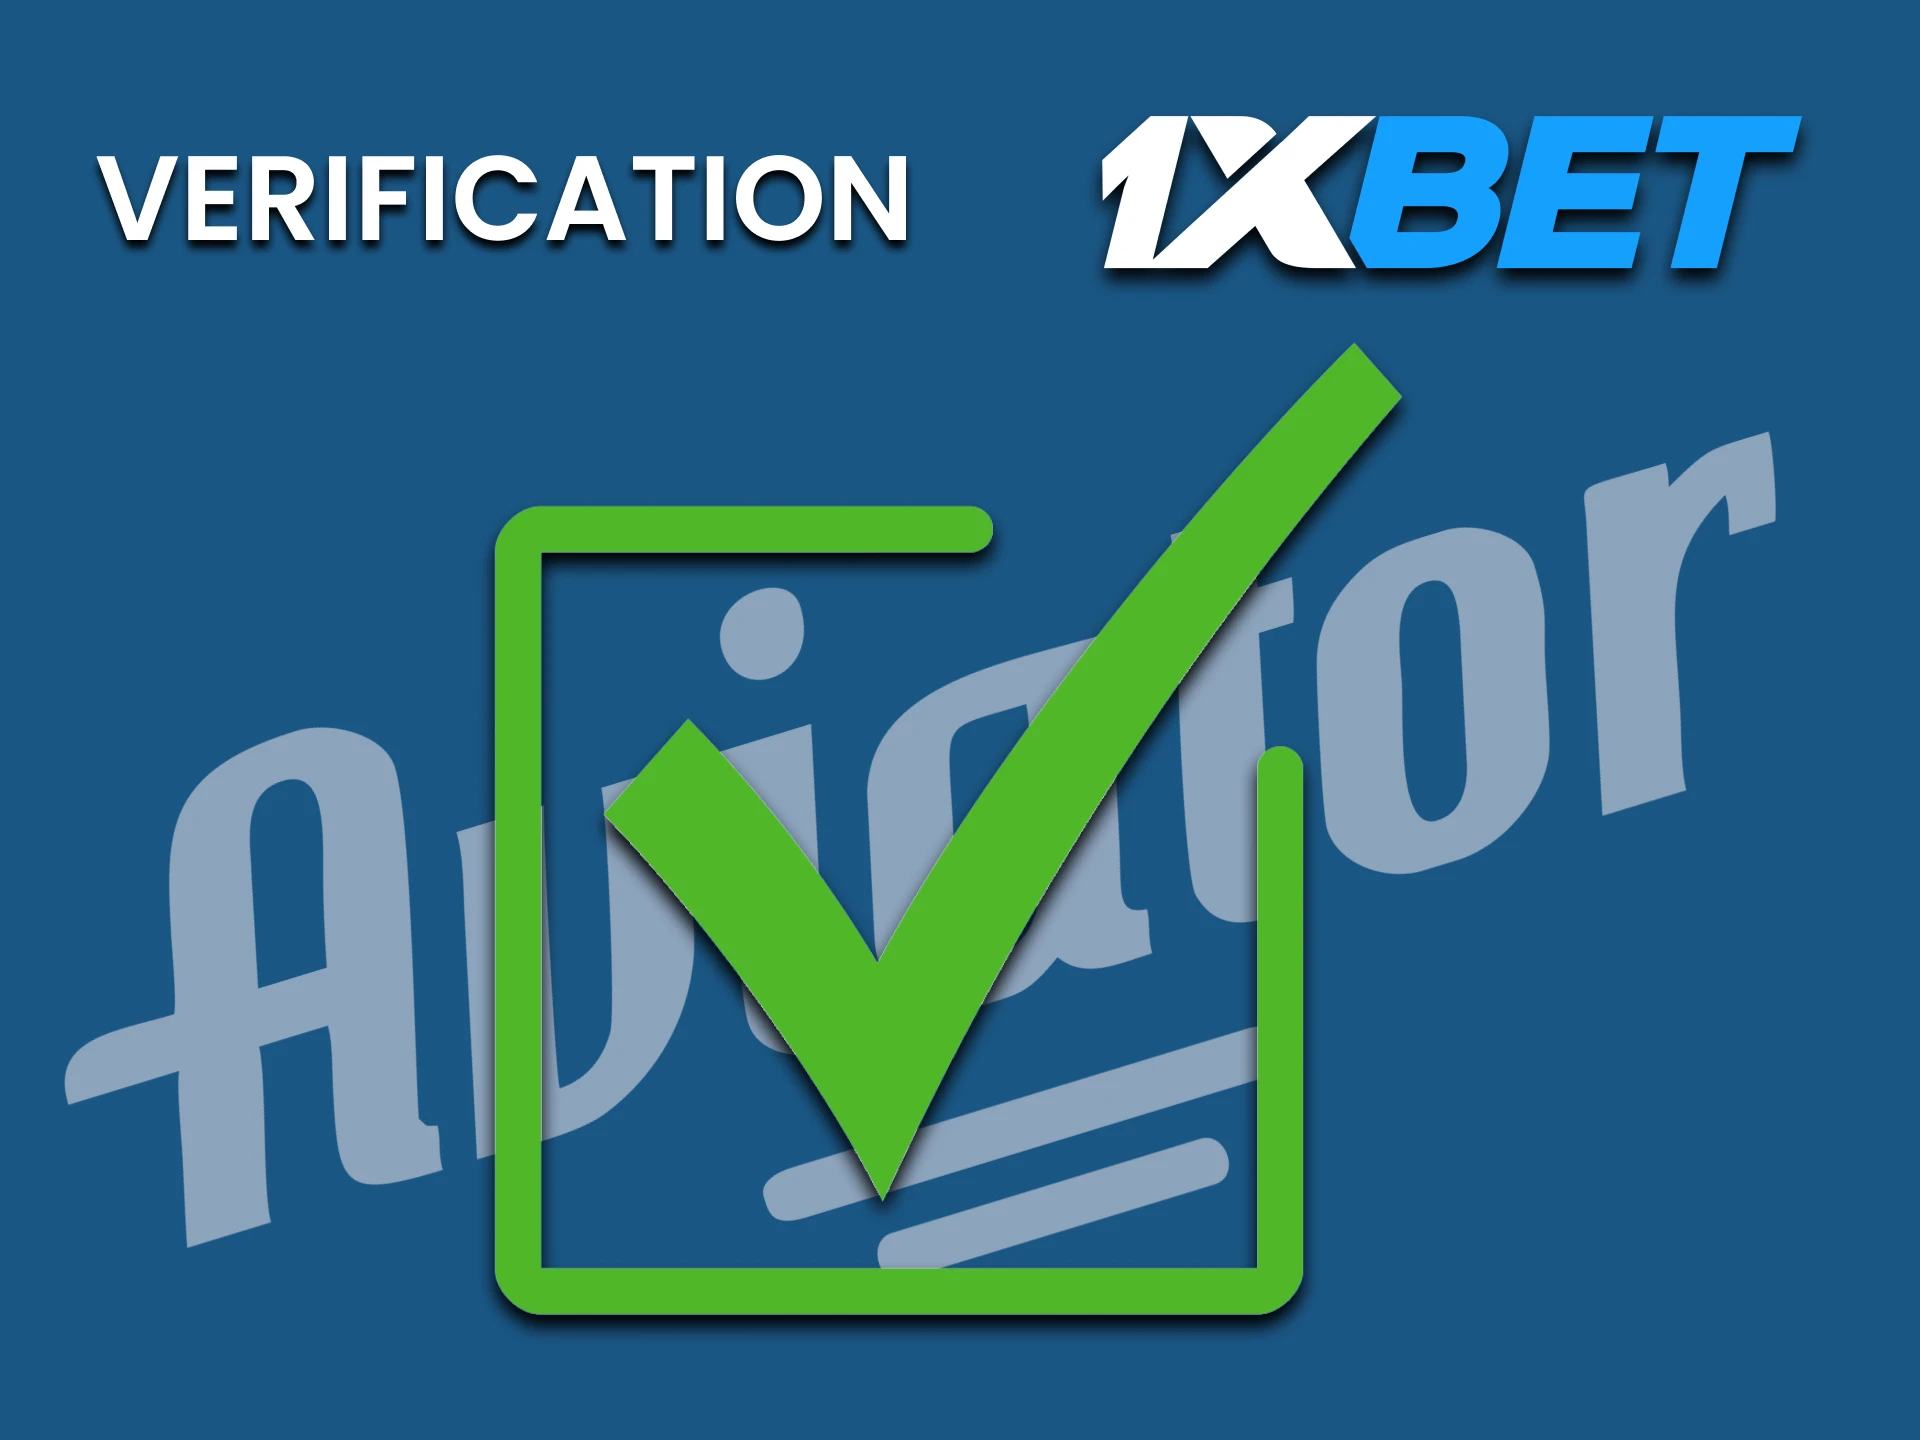 Fill out all the data on the 1xbet website for the Aviator game.